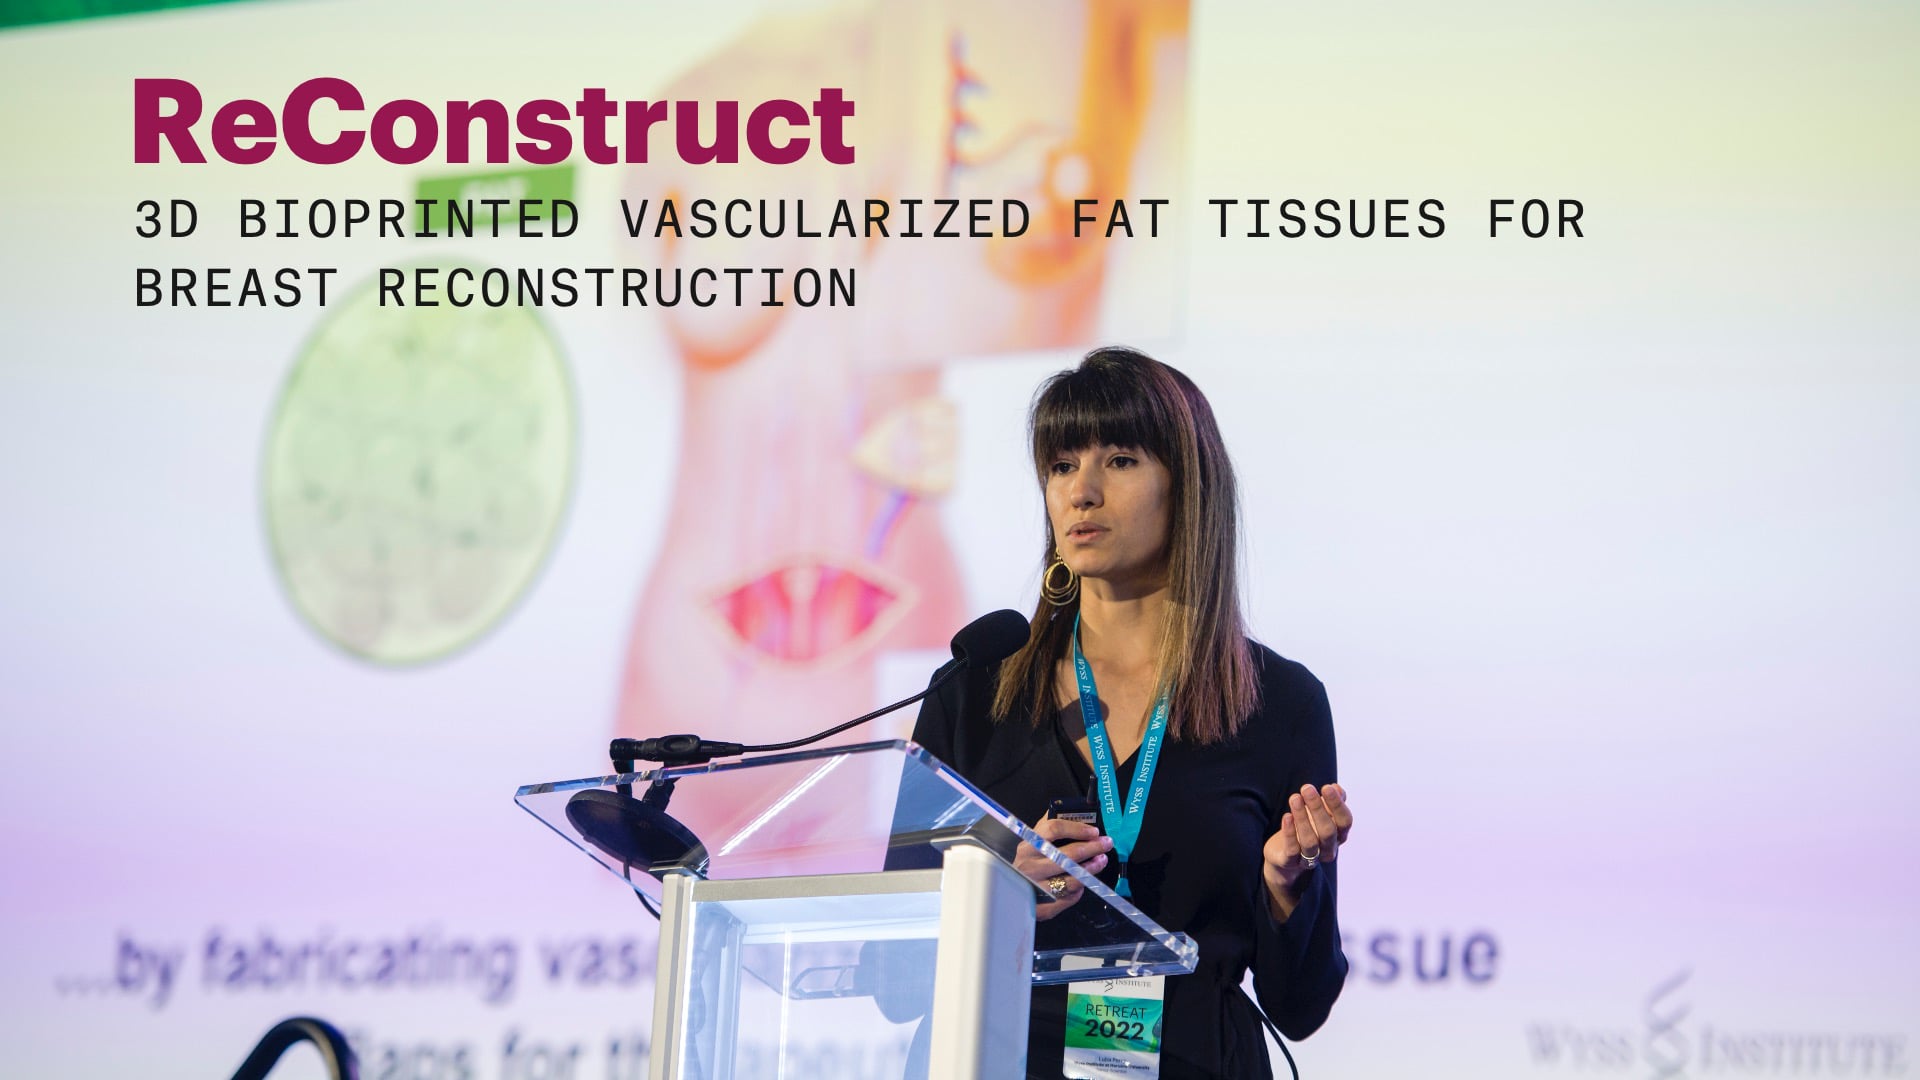 ReConstruct - 3D Bioprinted Vascularized Fat Tissues for Breast Reconstruction